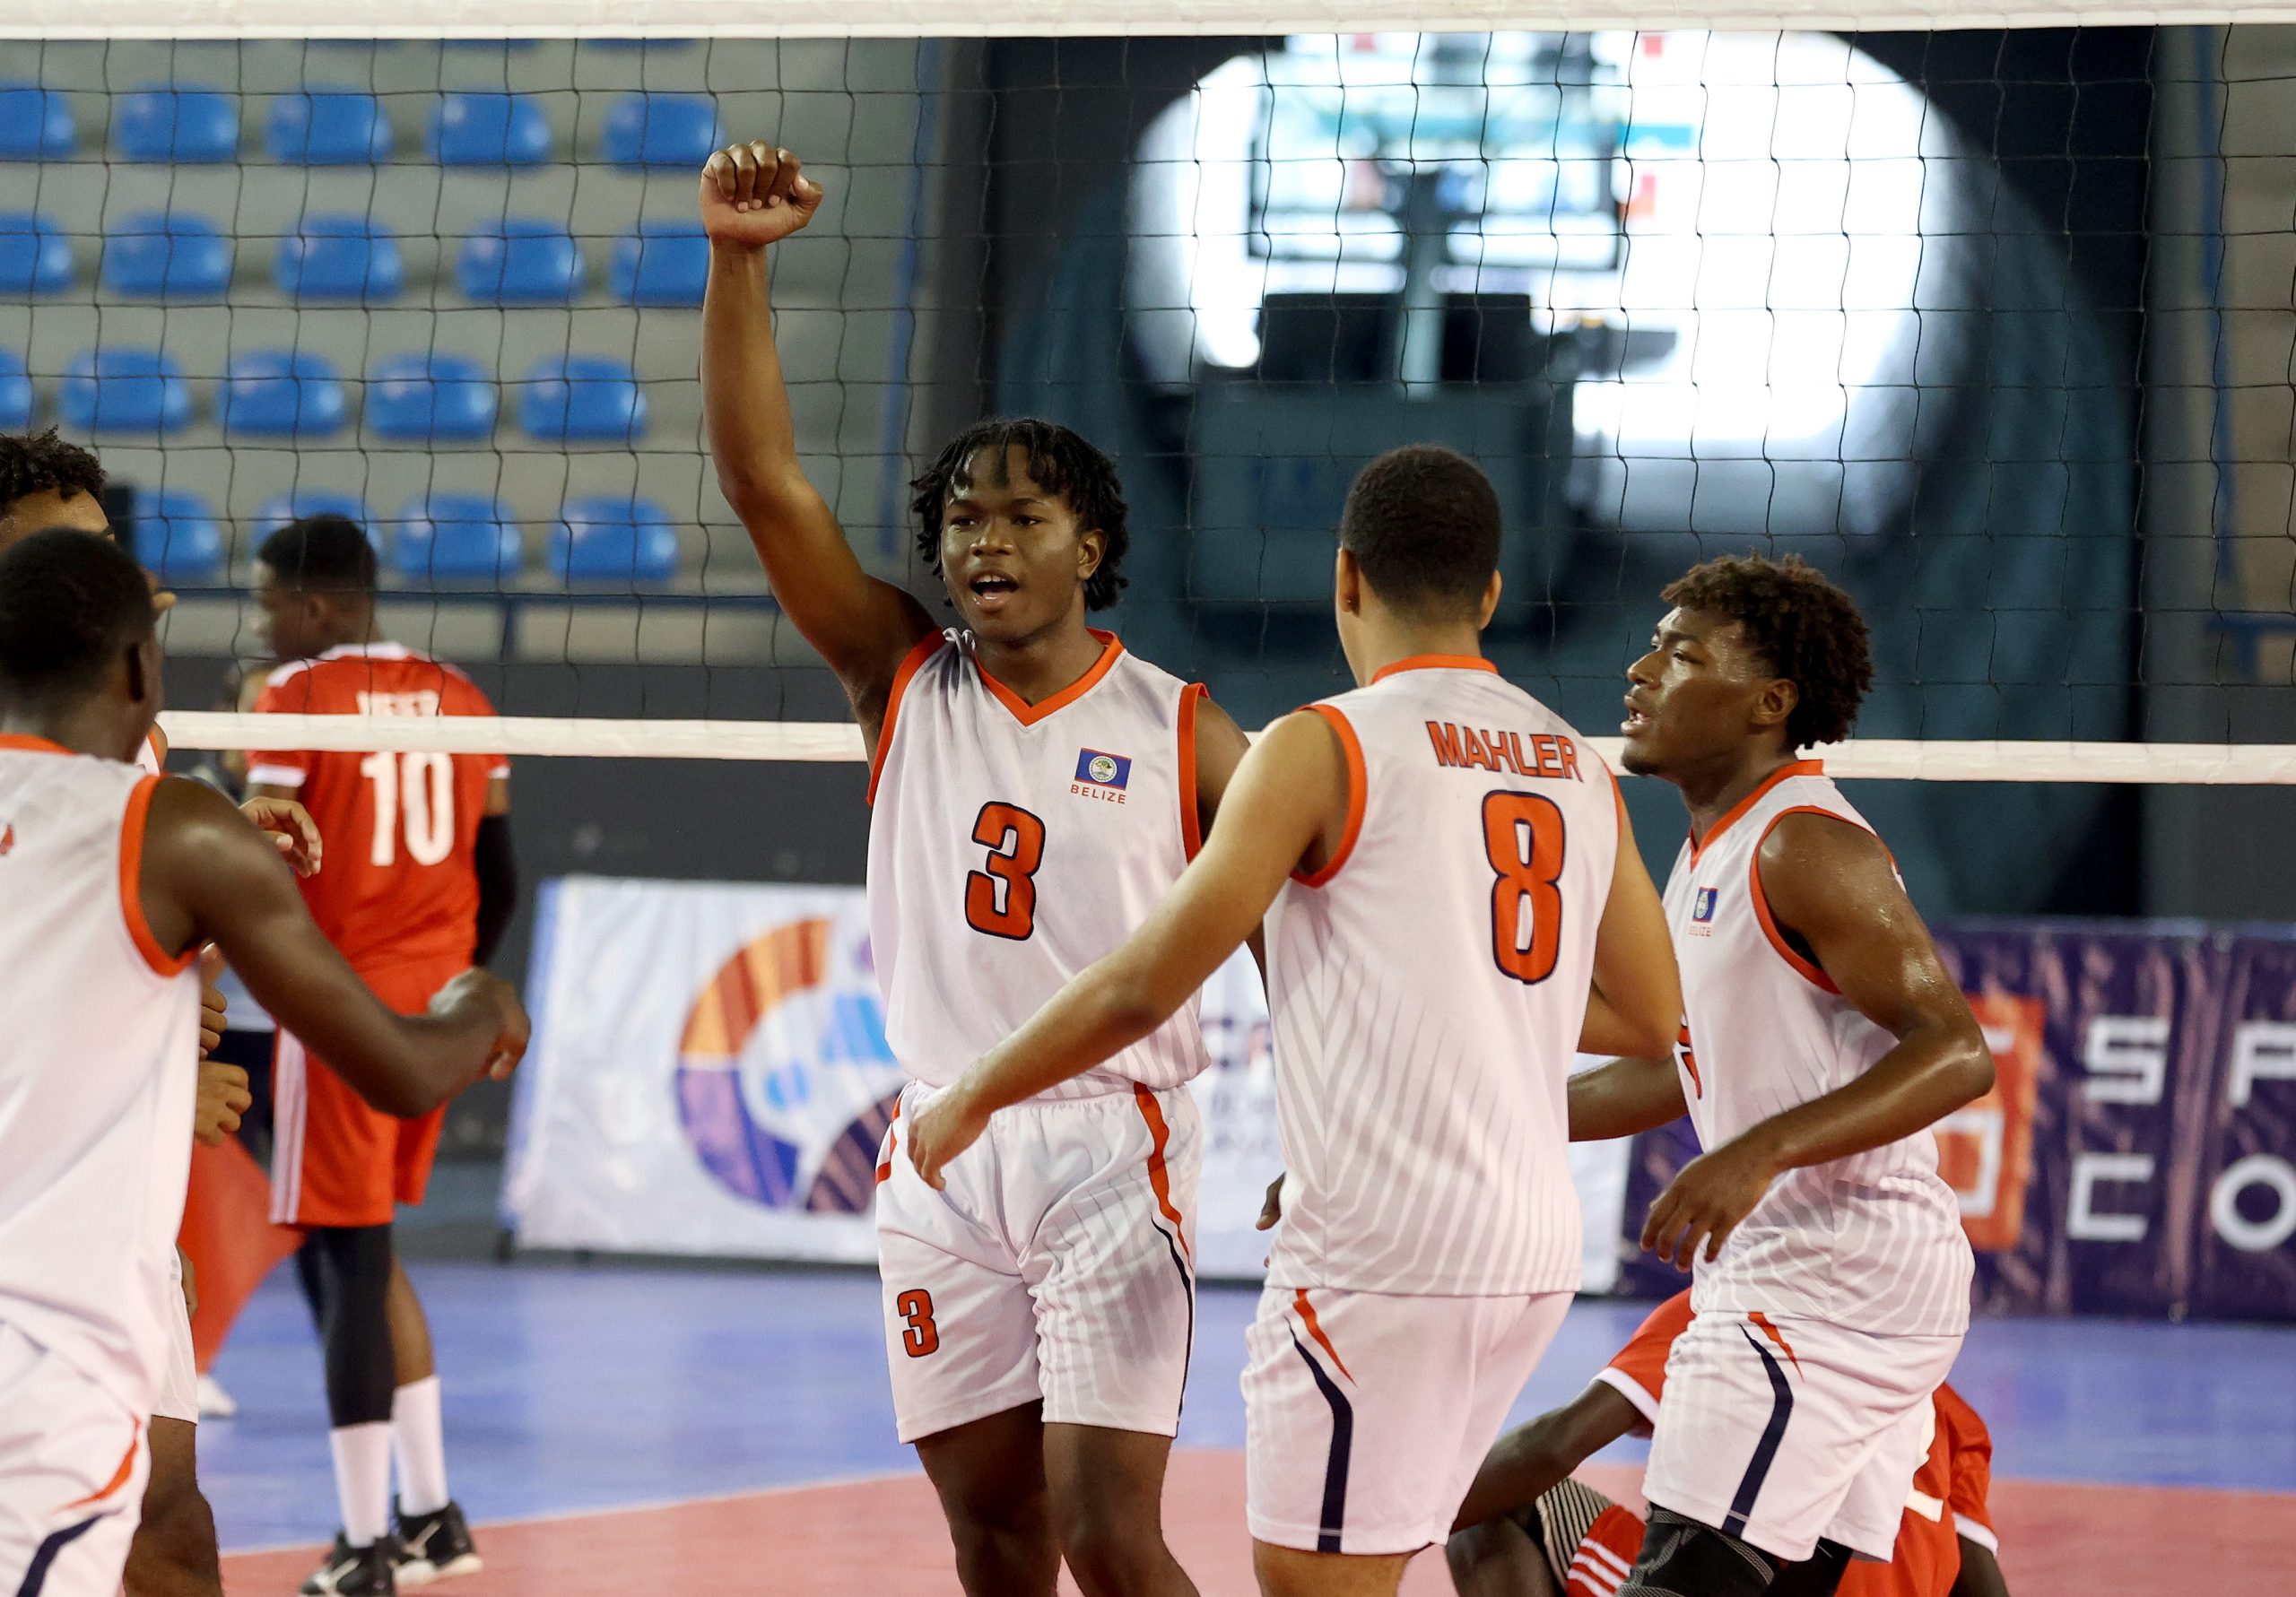 Belize finishes 7th place after defeating Suriname in straight sets